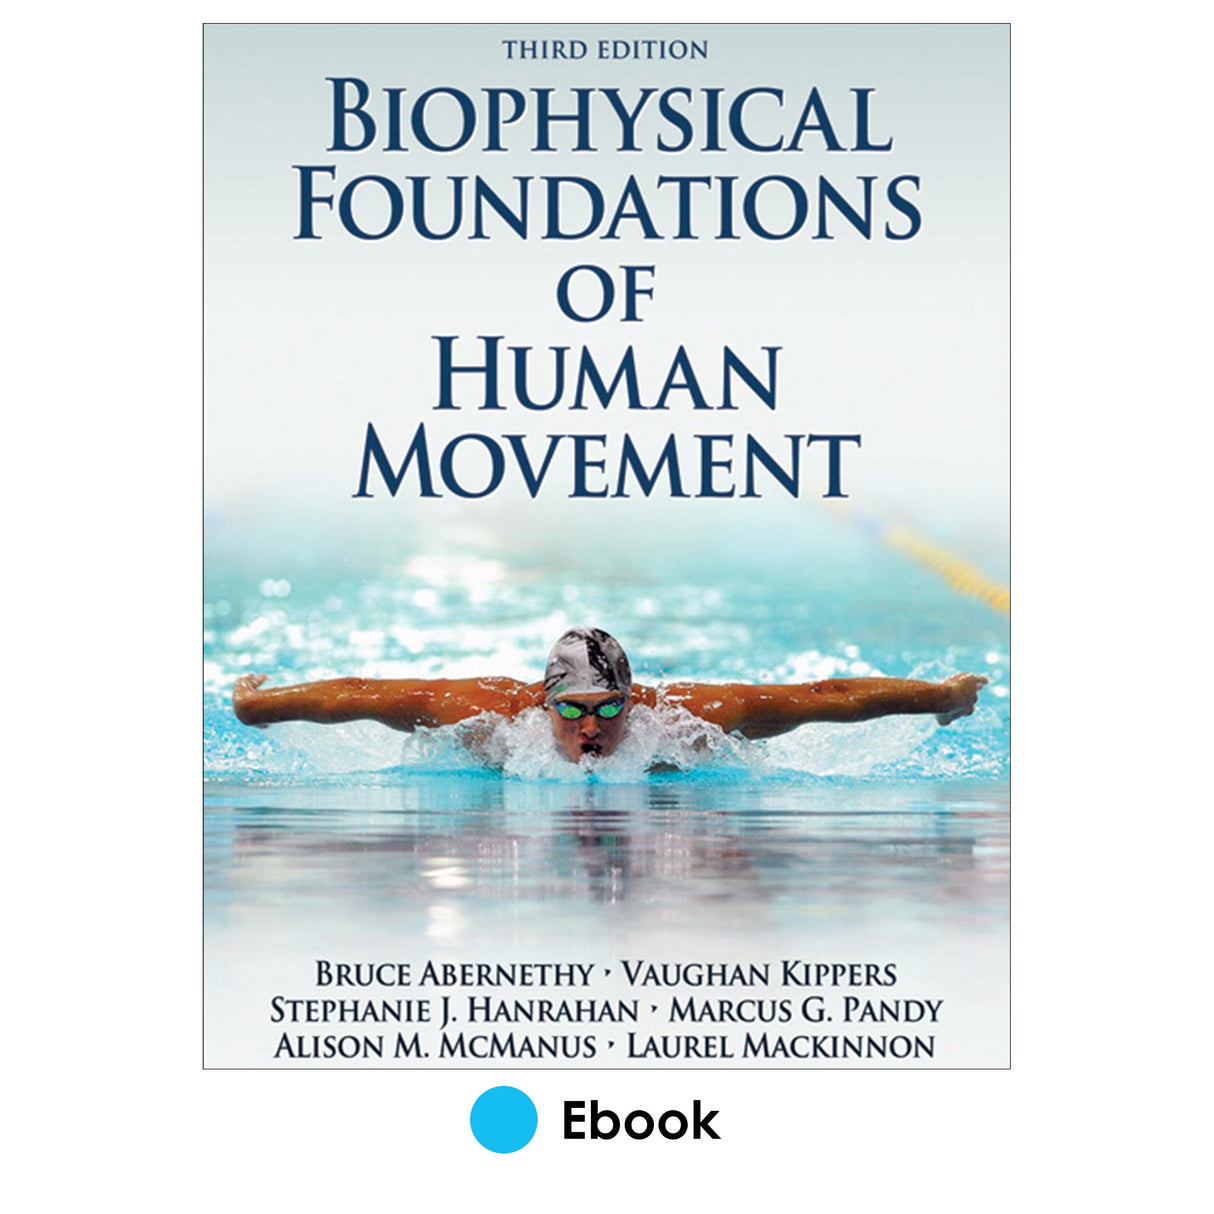 Biophysical Foundations of Human Movement 3rd Edition PDF